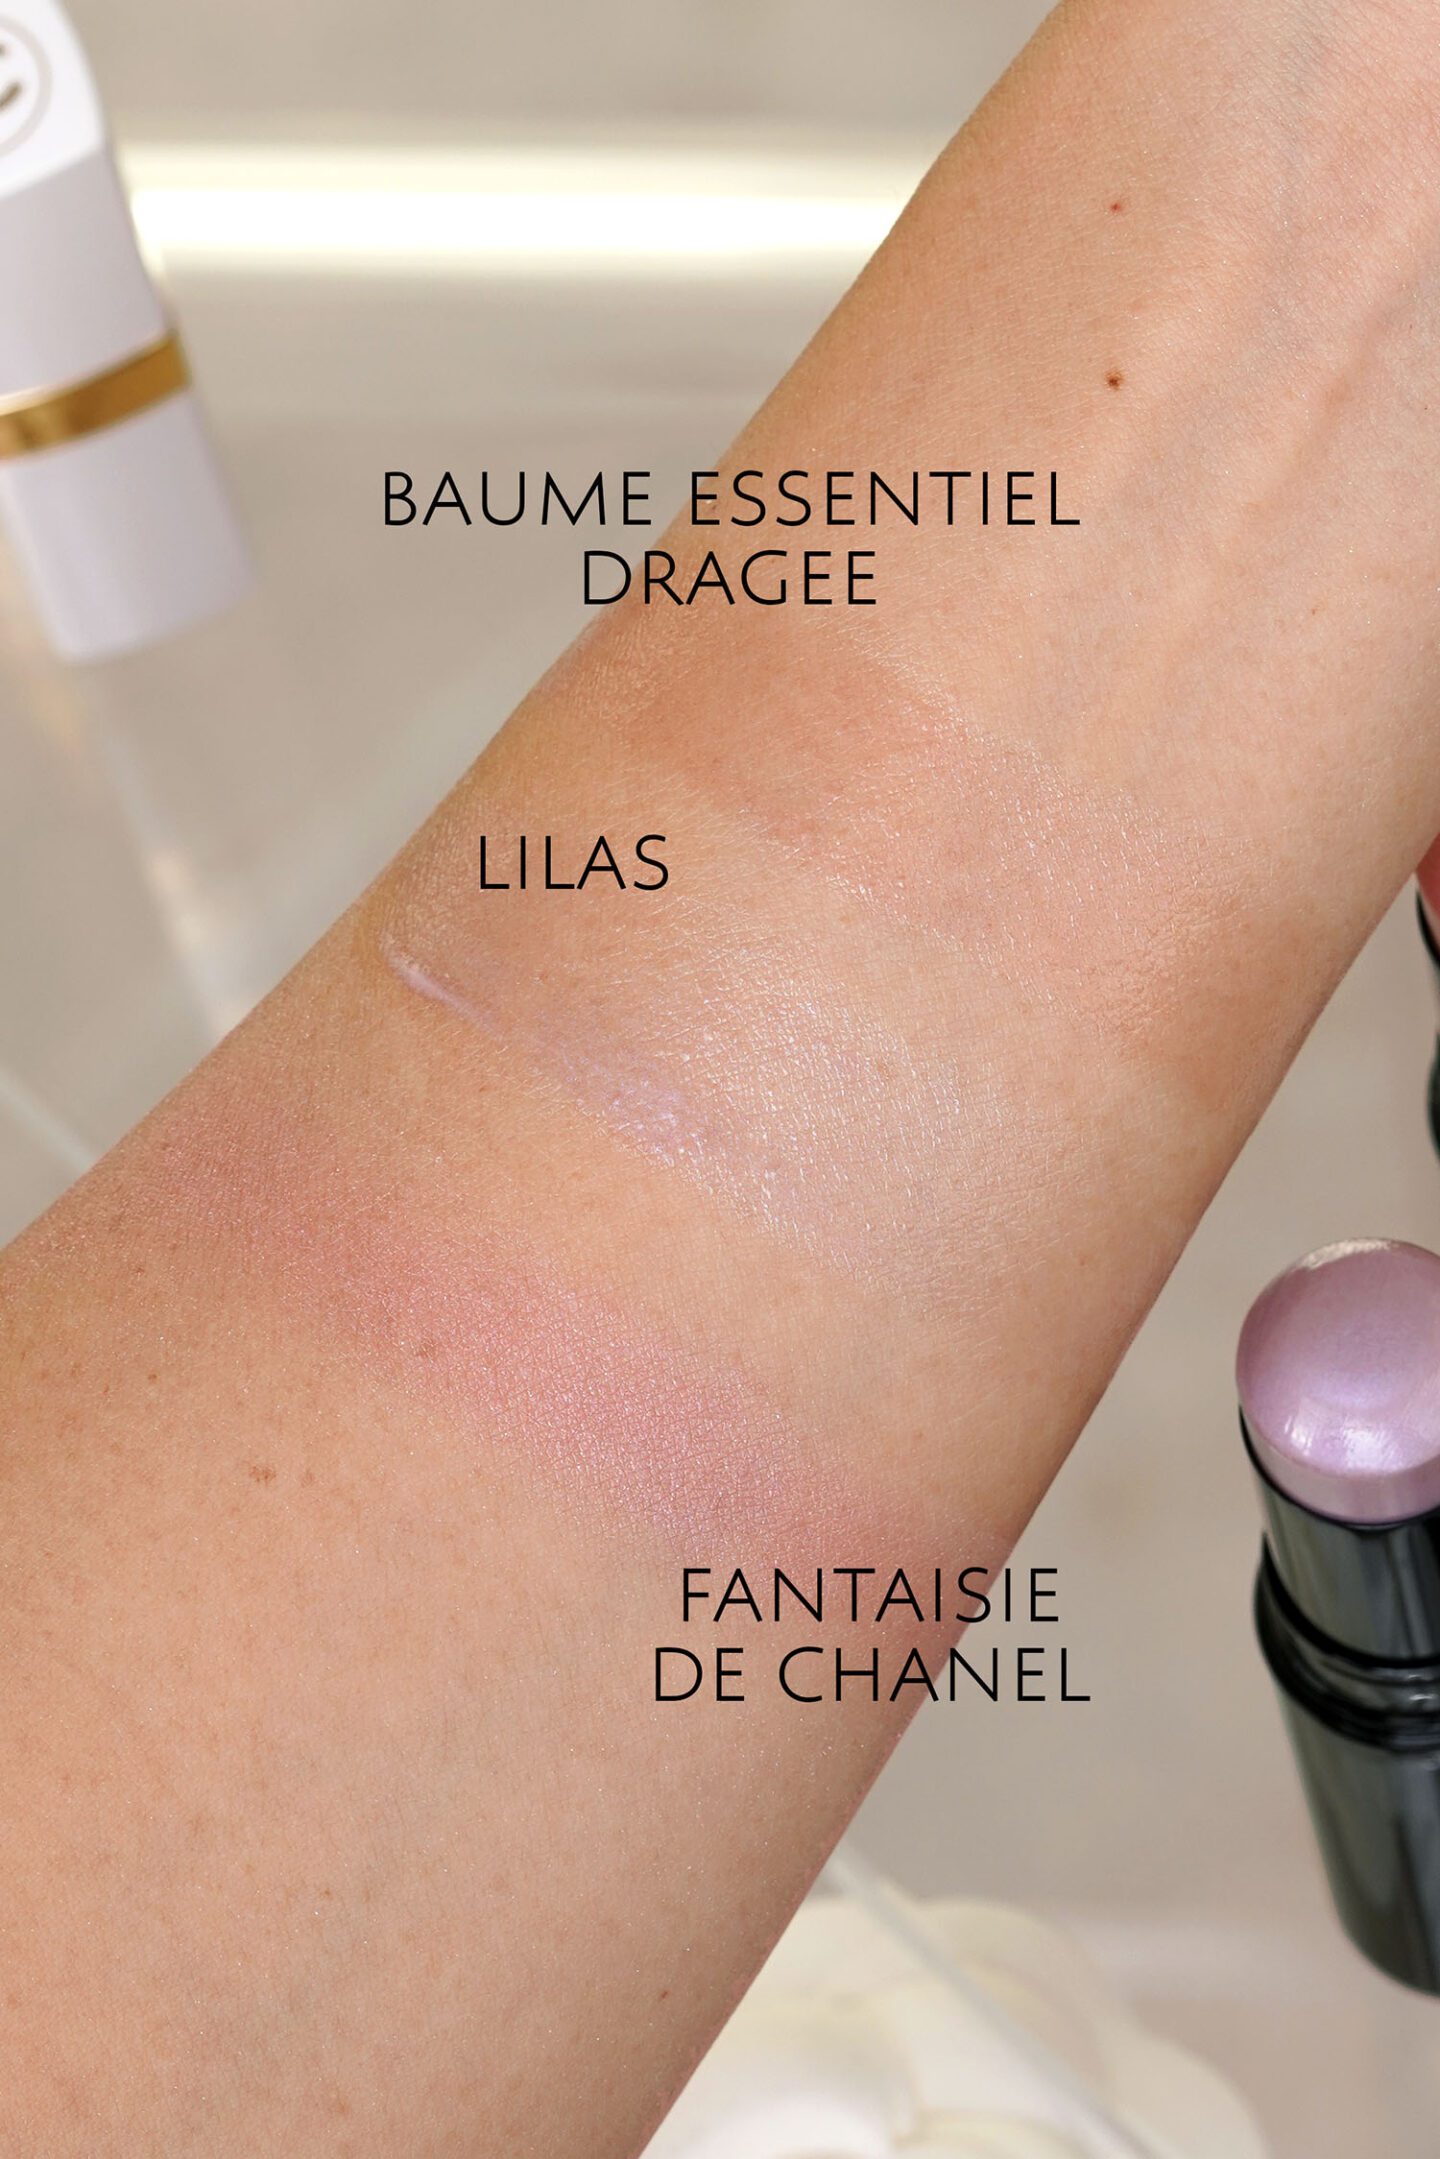 Chanel Archives - Page 2 of 84 - The Beauty Look Book